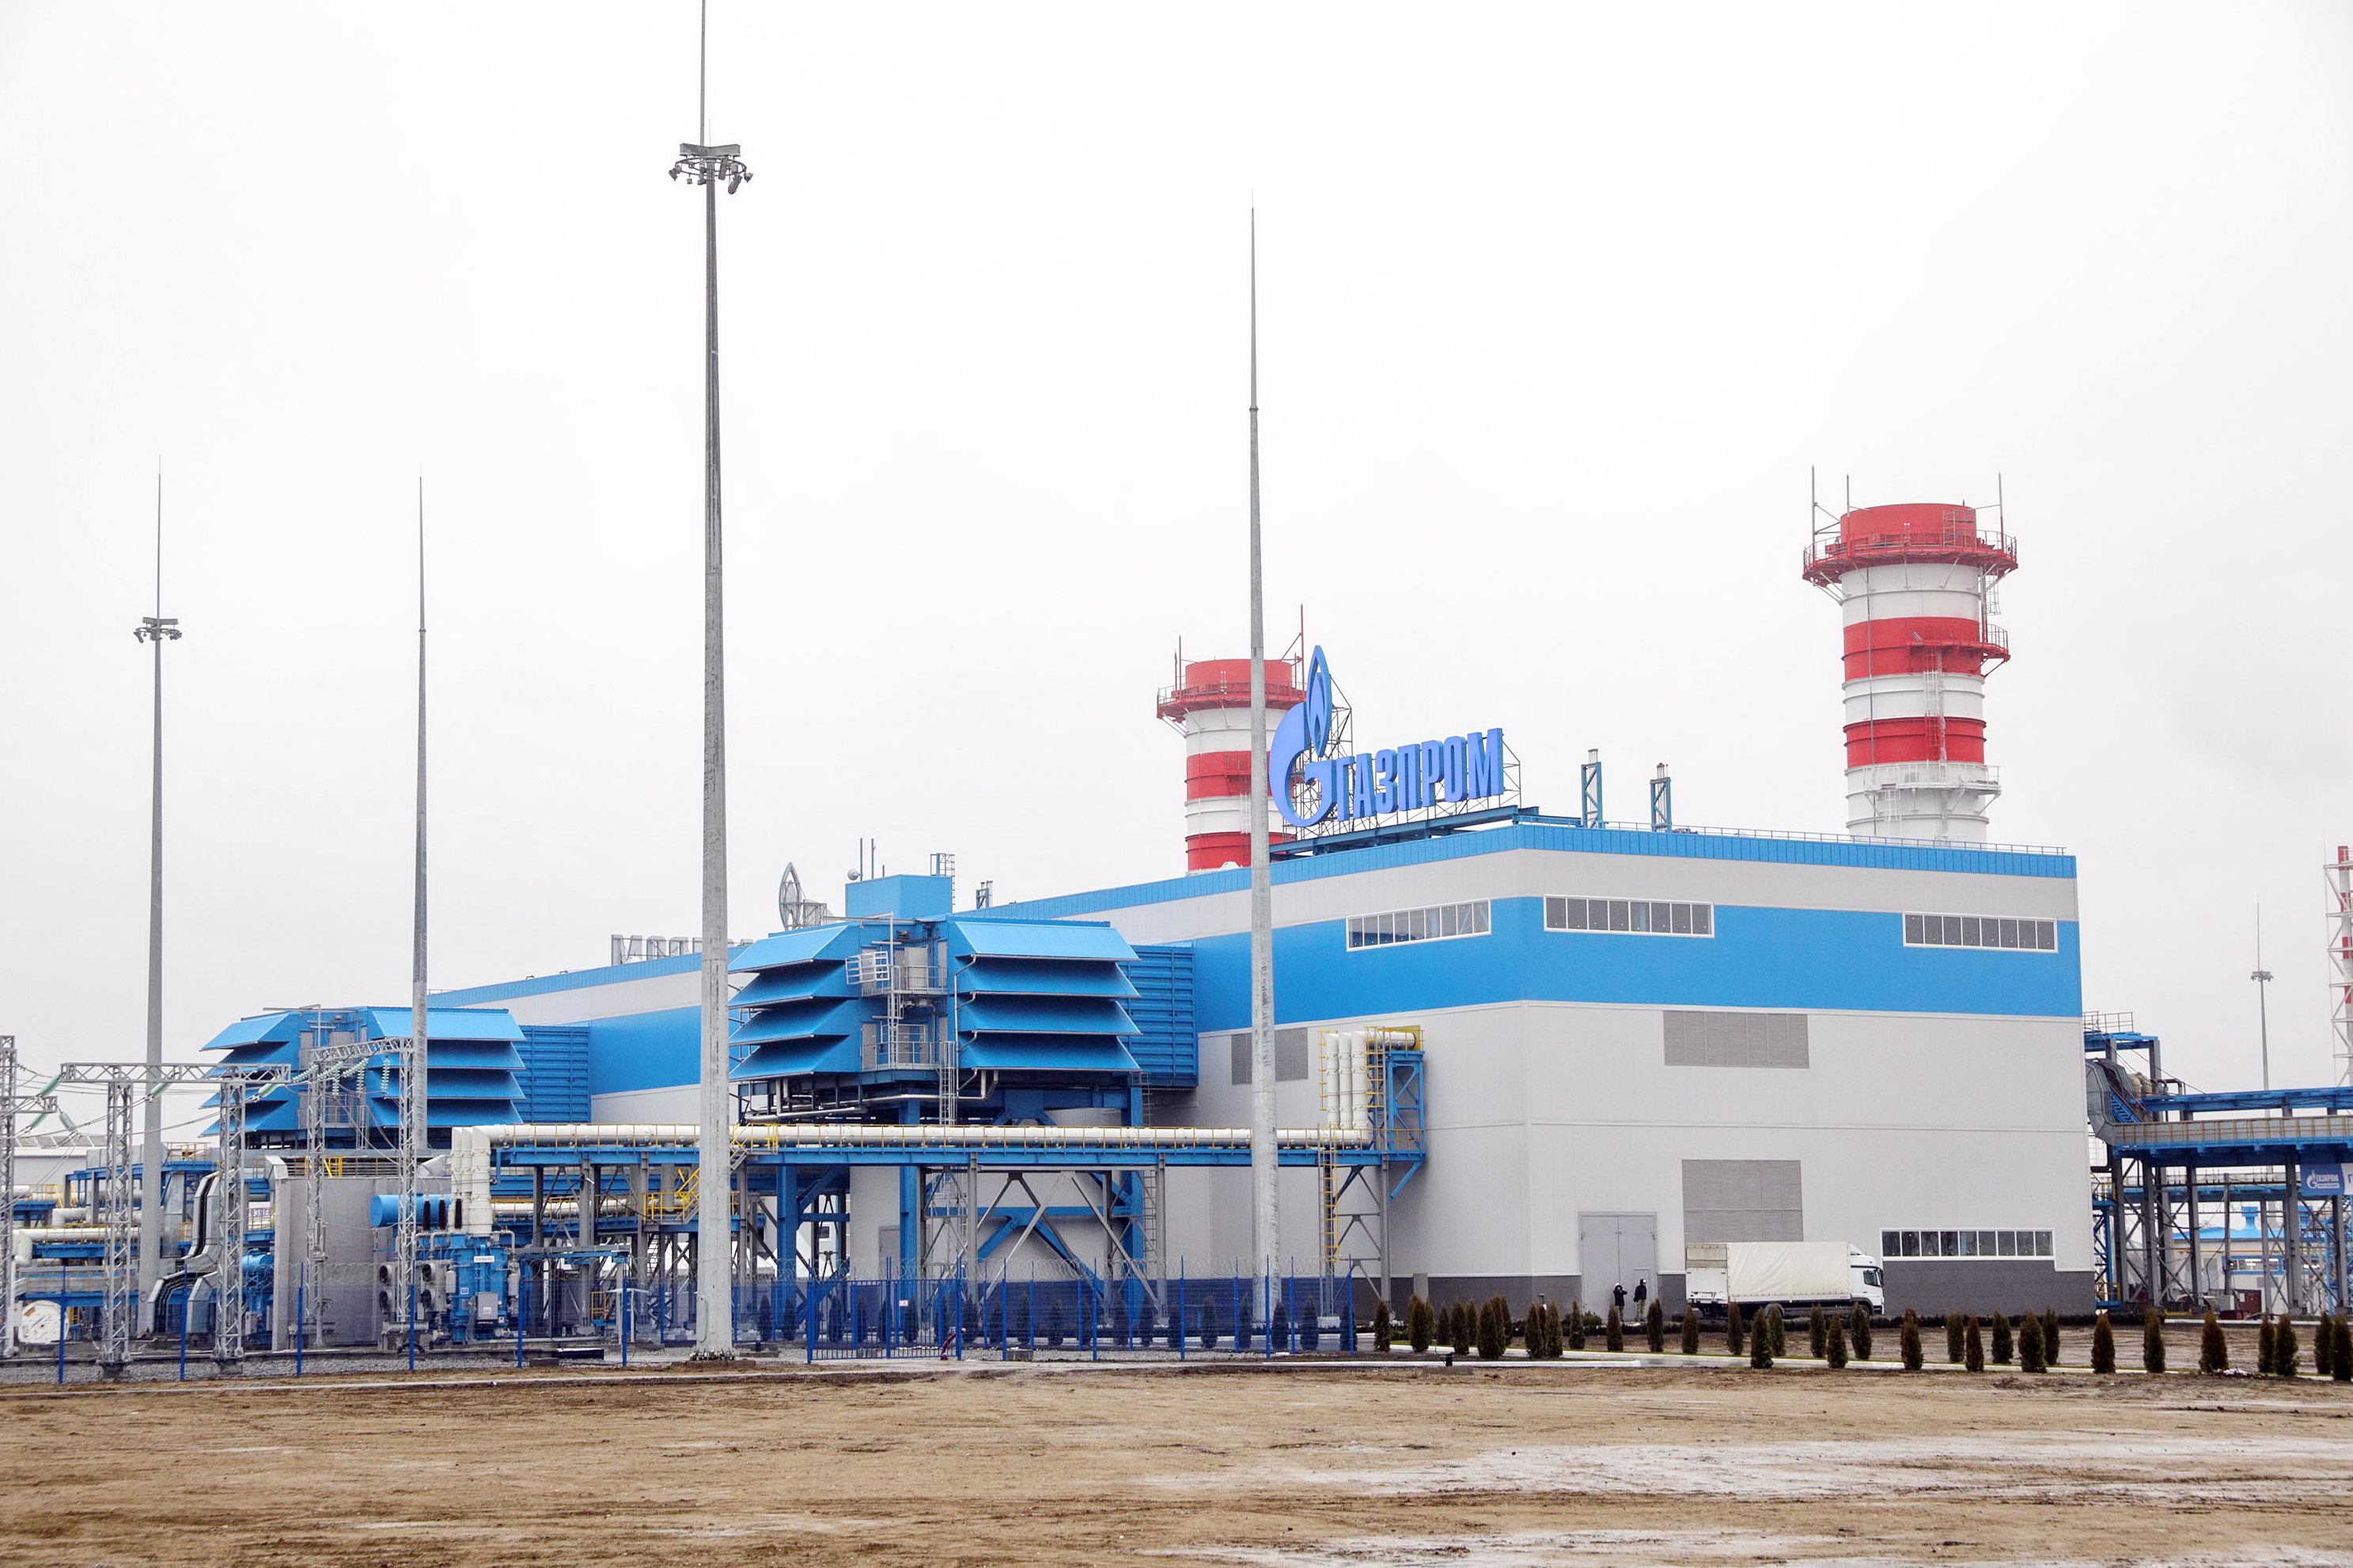 First power unit of Grozny TPP comes onstream